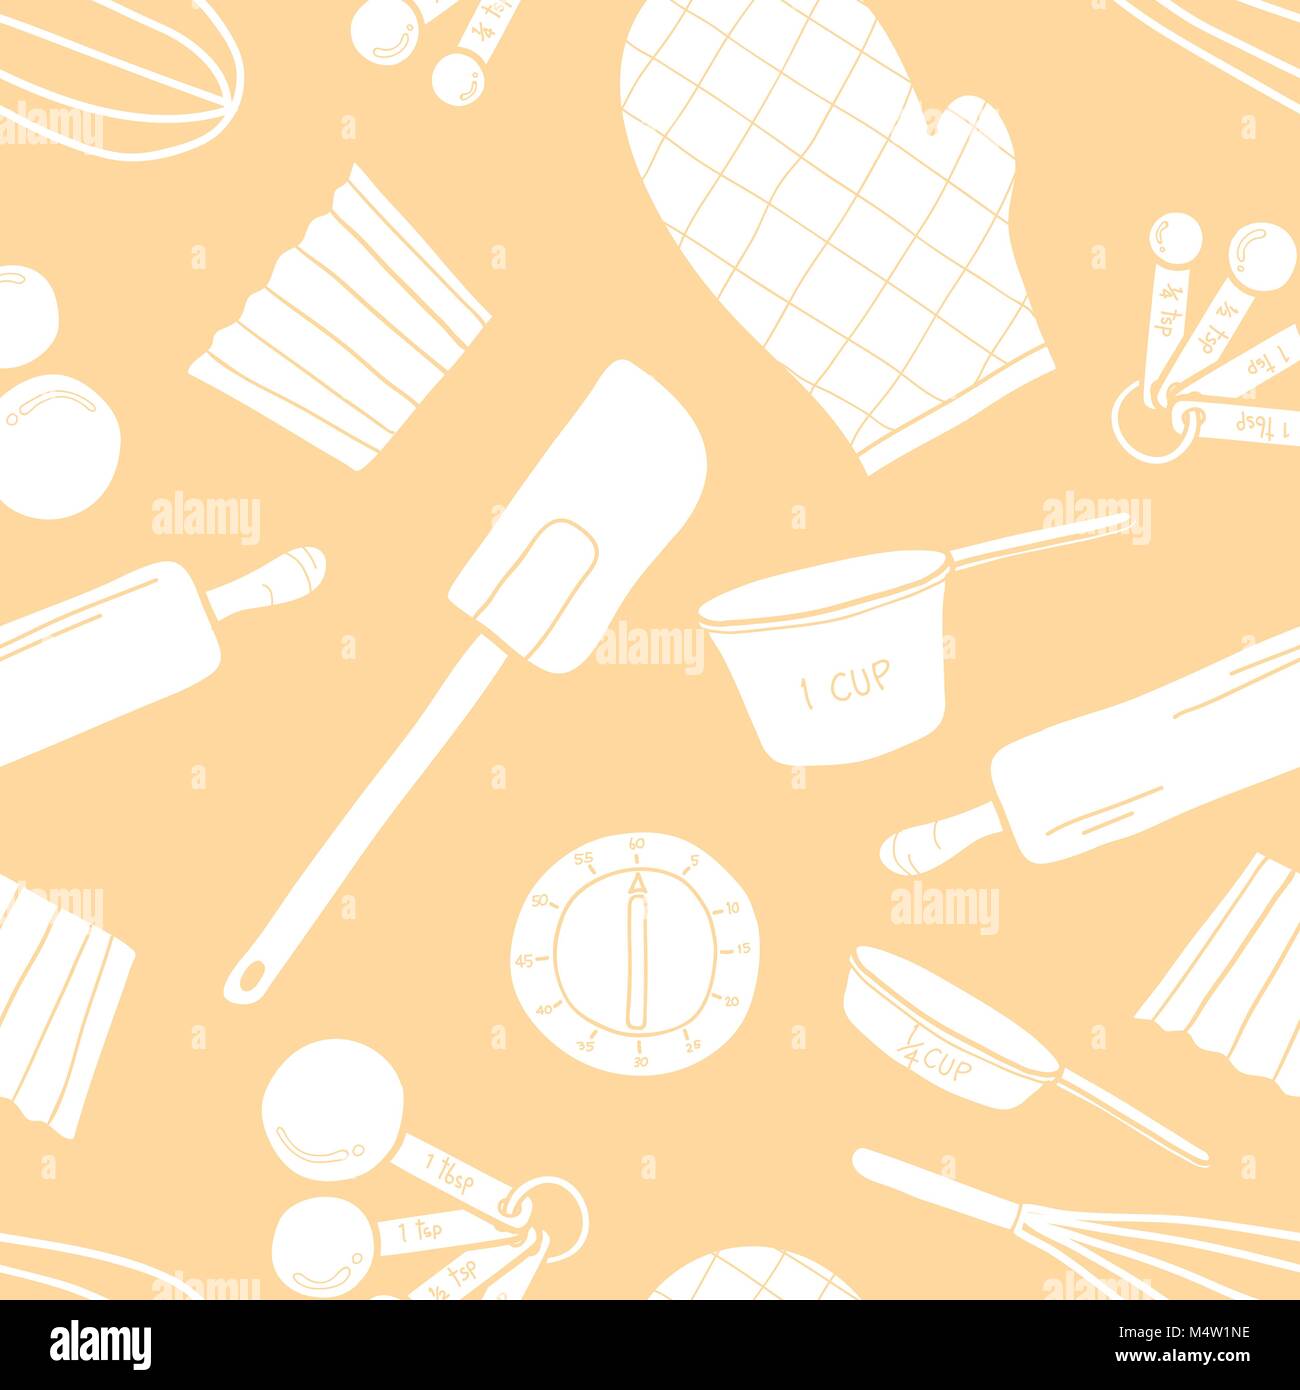 Seamless pattern of baking tools in white silhouette random on pastel pink background. Cute vector illustration of cooking stuff in hand drawn style f Stock Vector